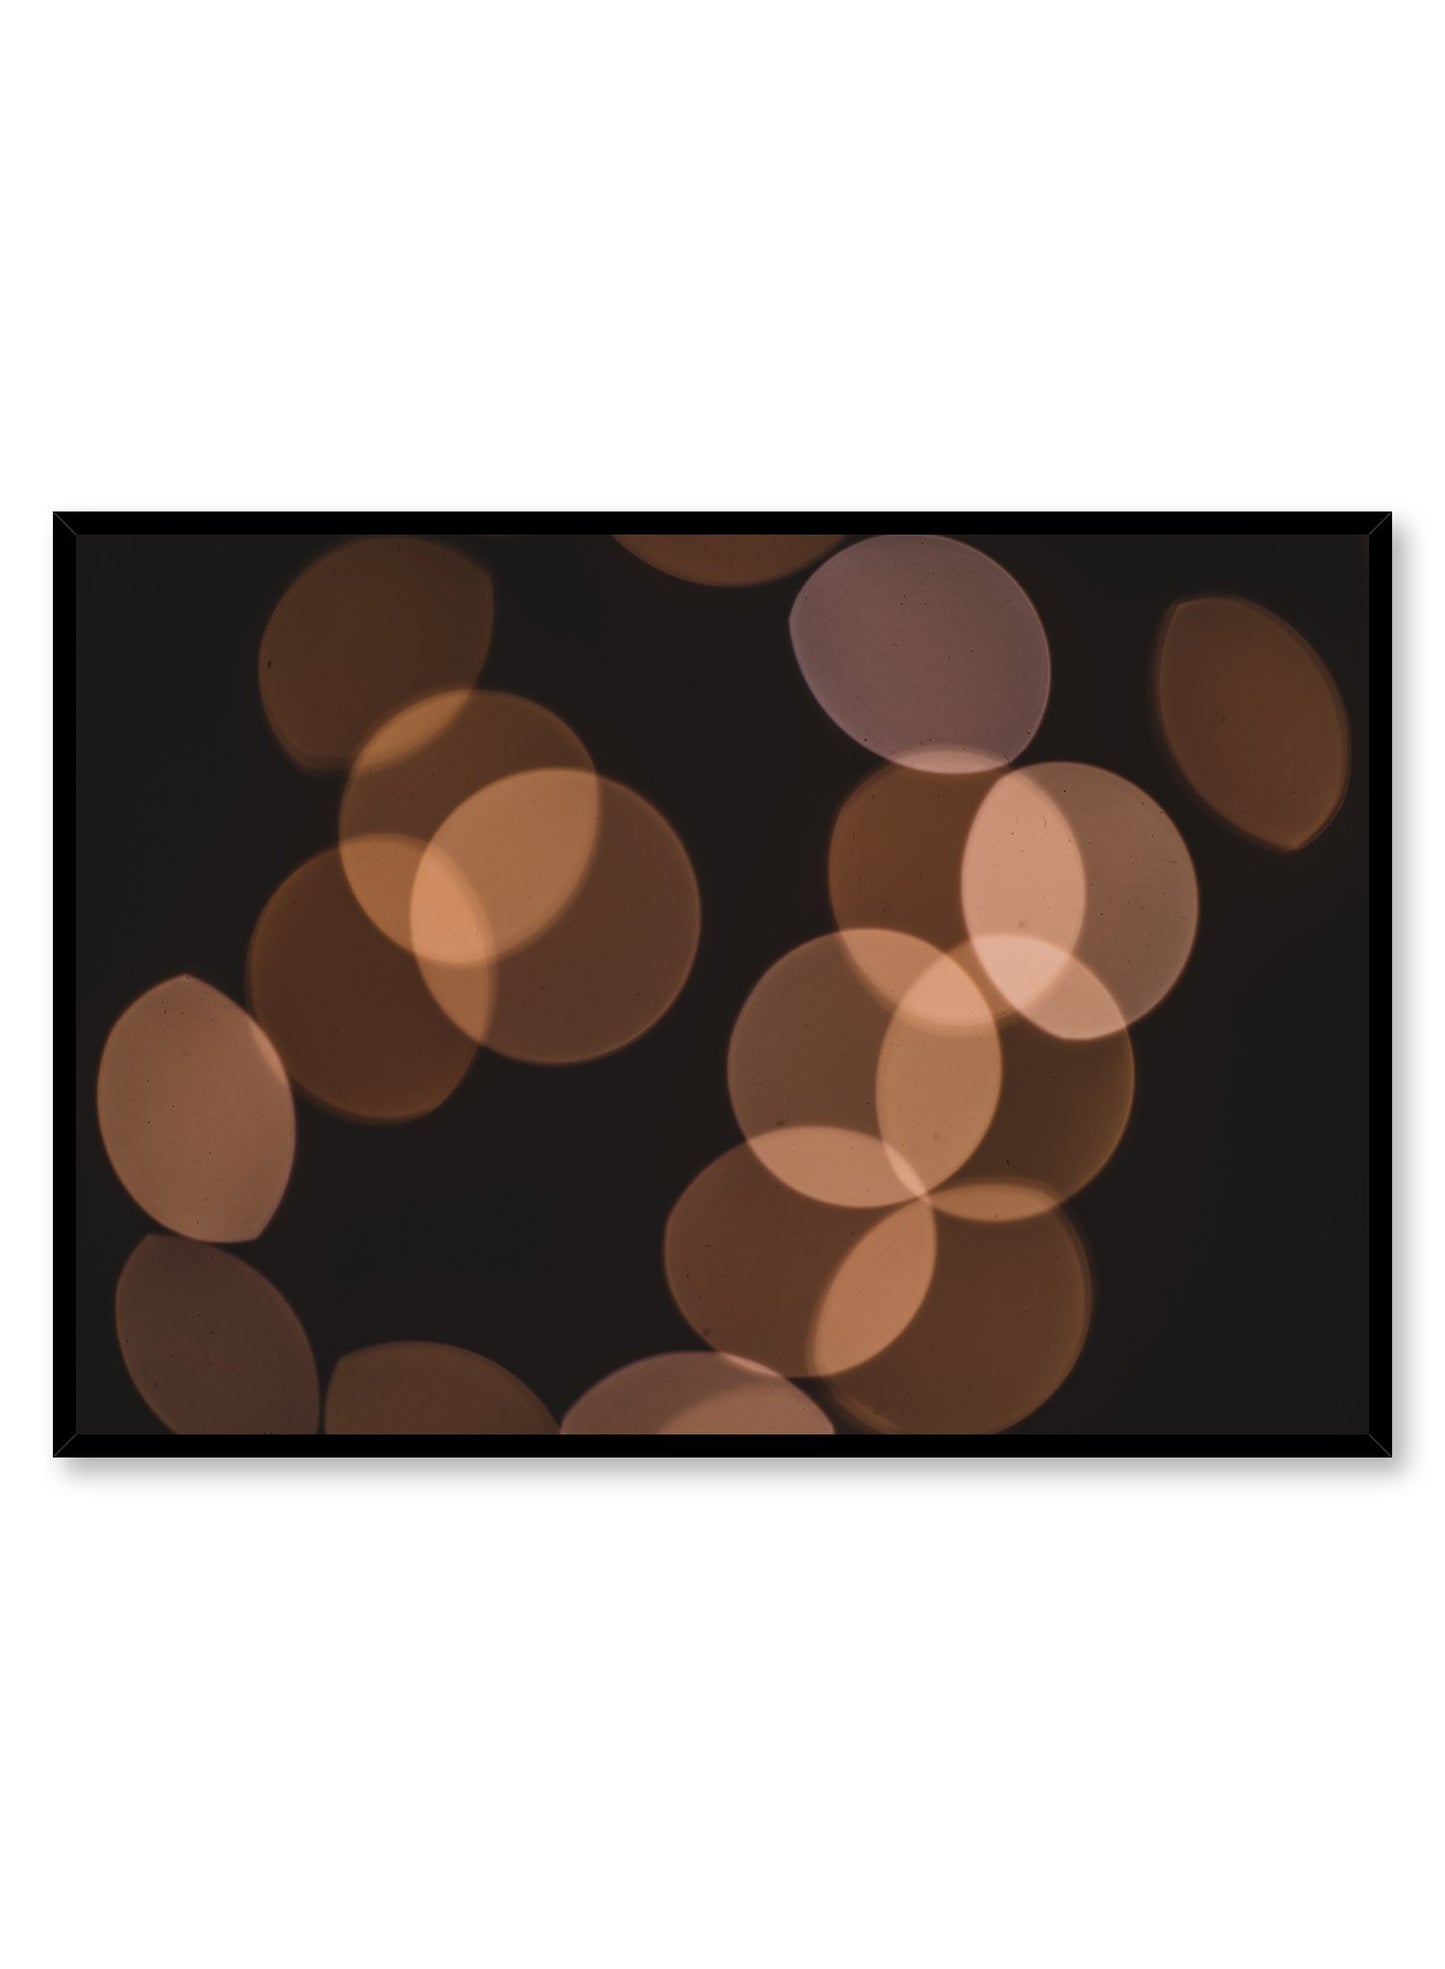 Minimalist design poster by Opposite Wall with Light Reflection photography